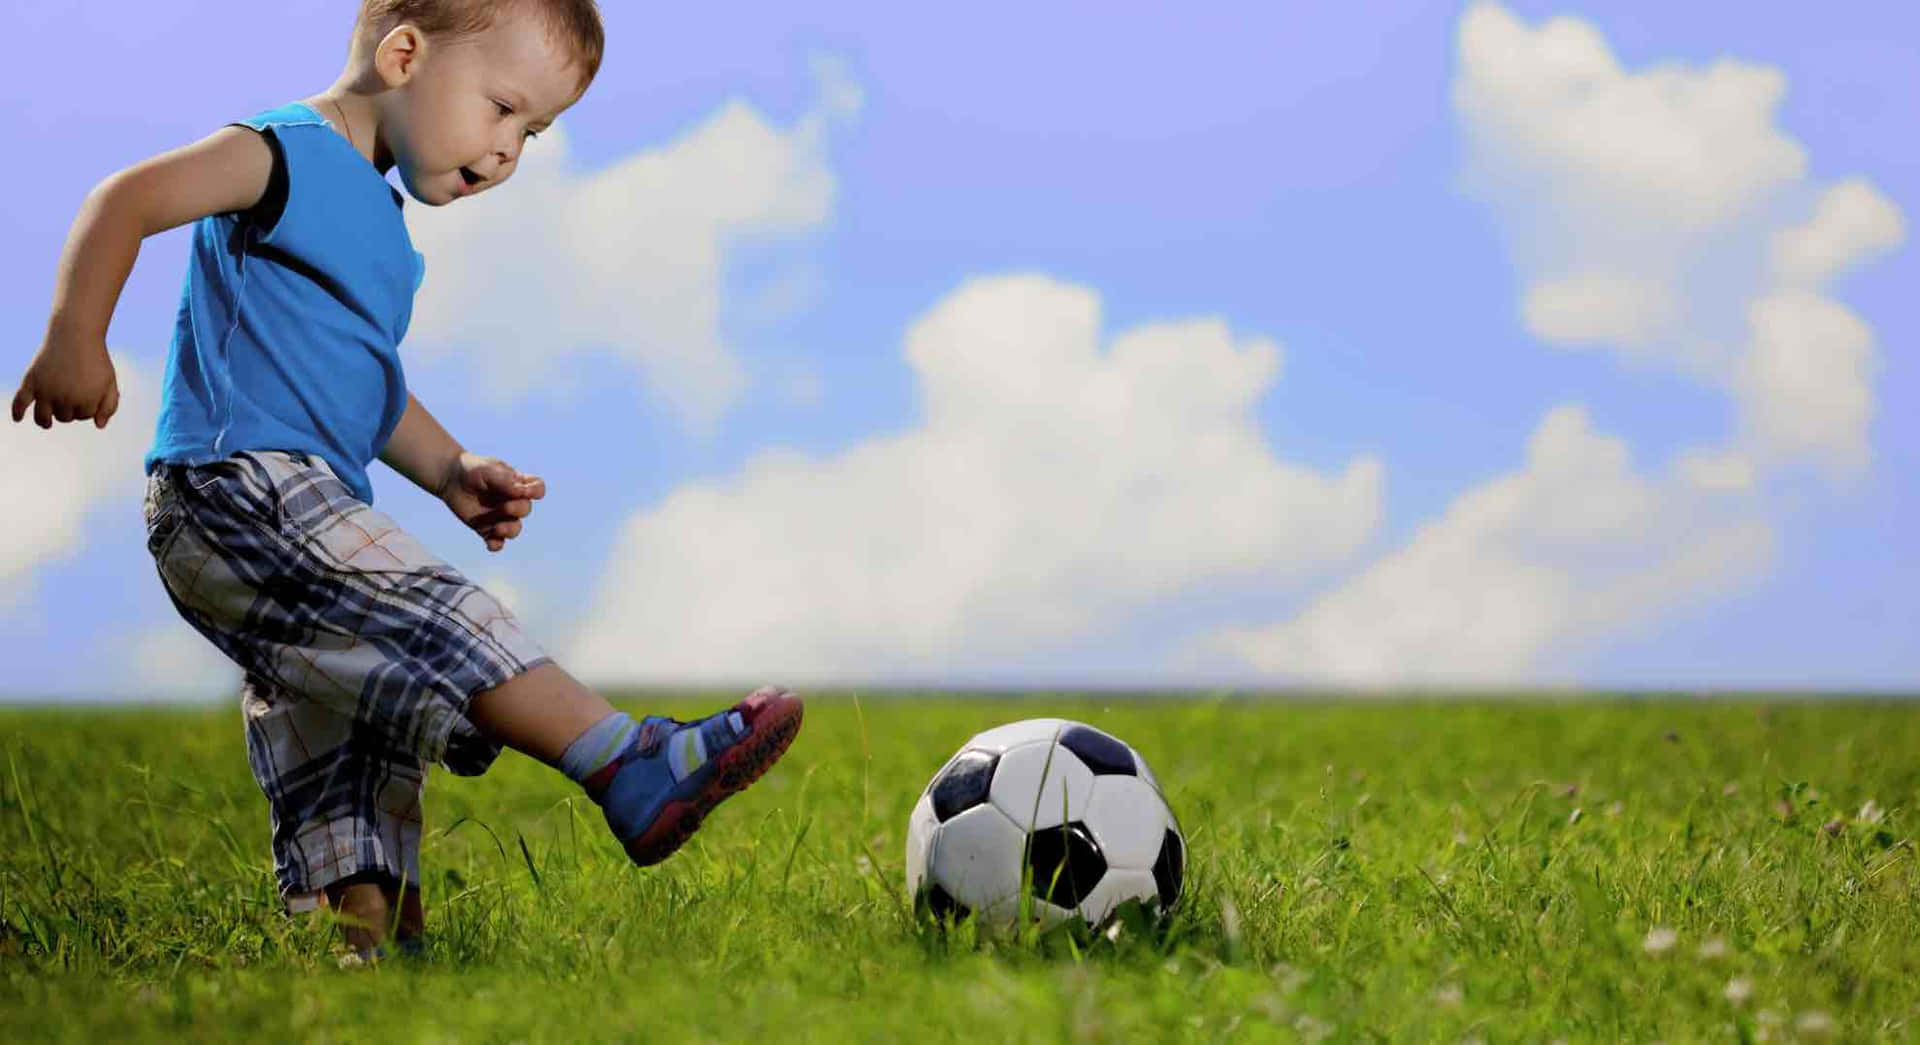 Young Child Playing Soccer Outdoors.jpg Wallpaper